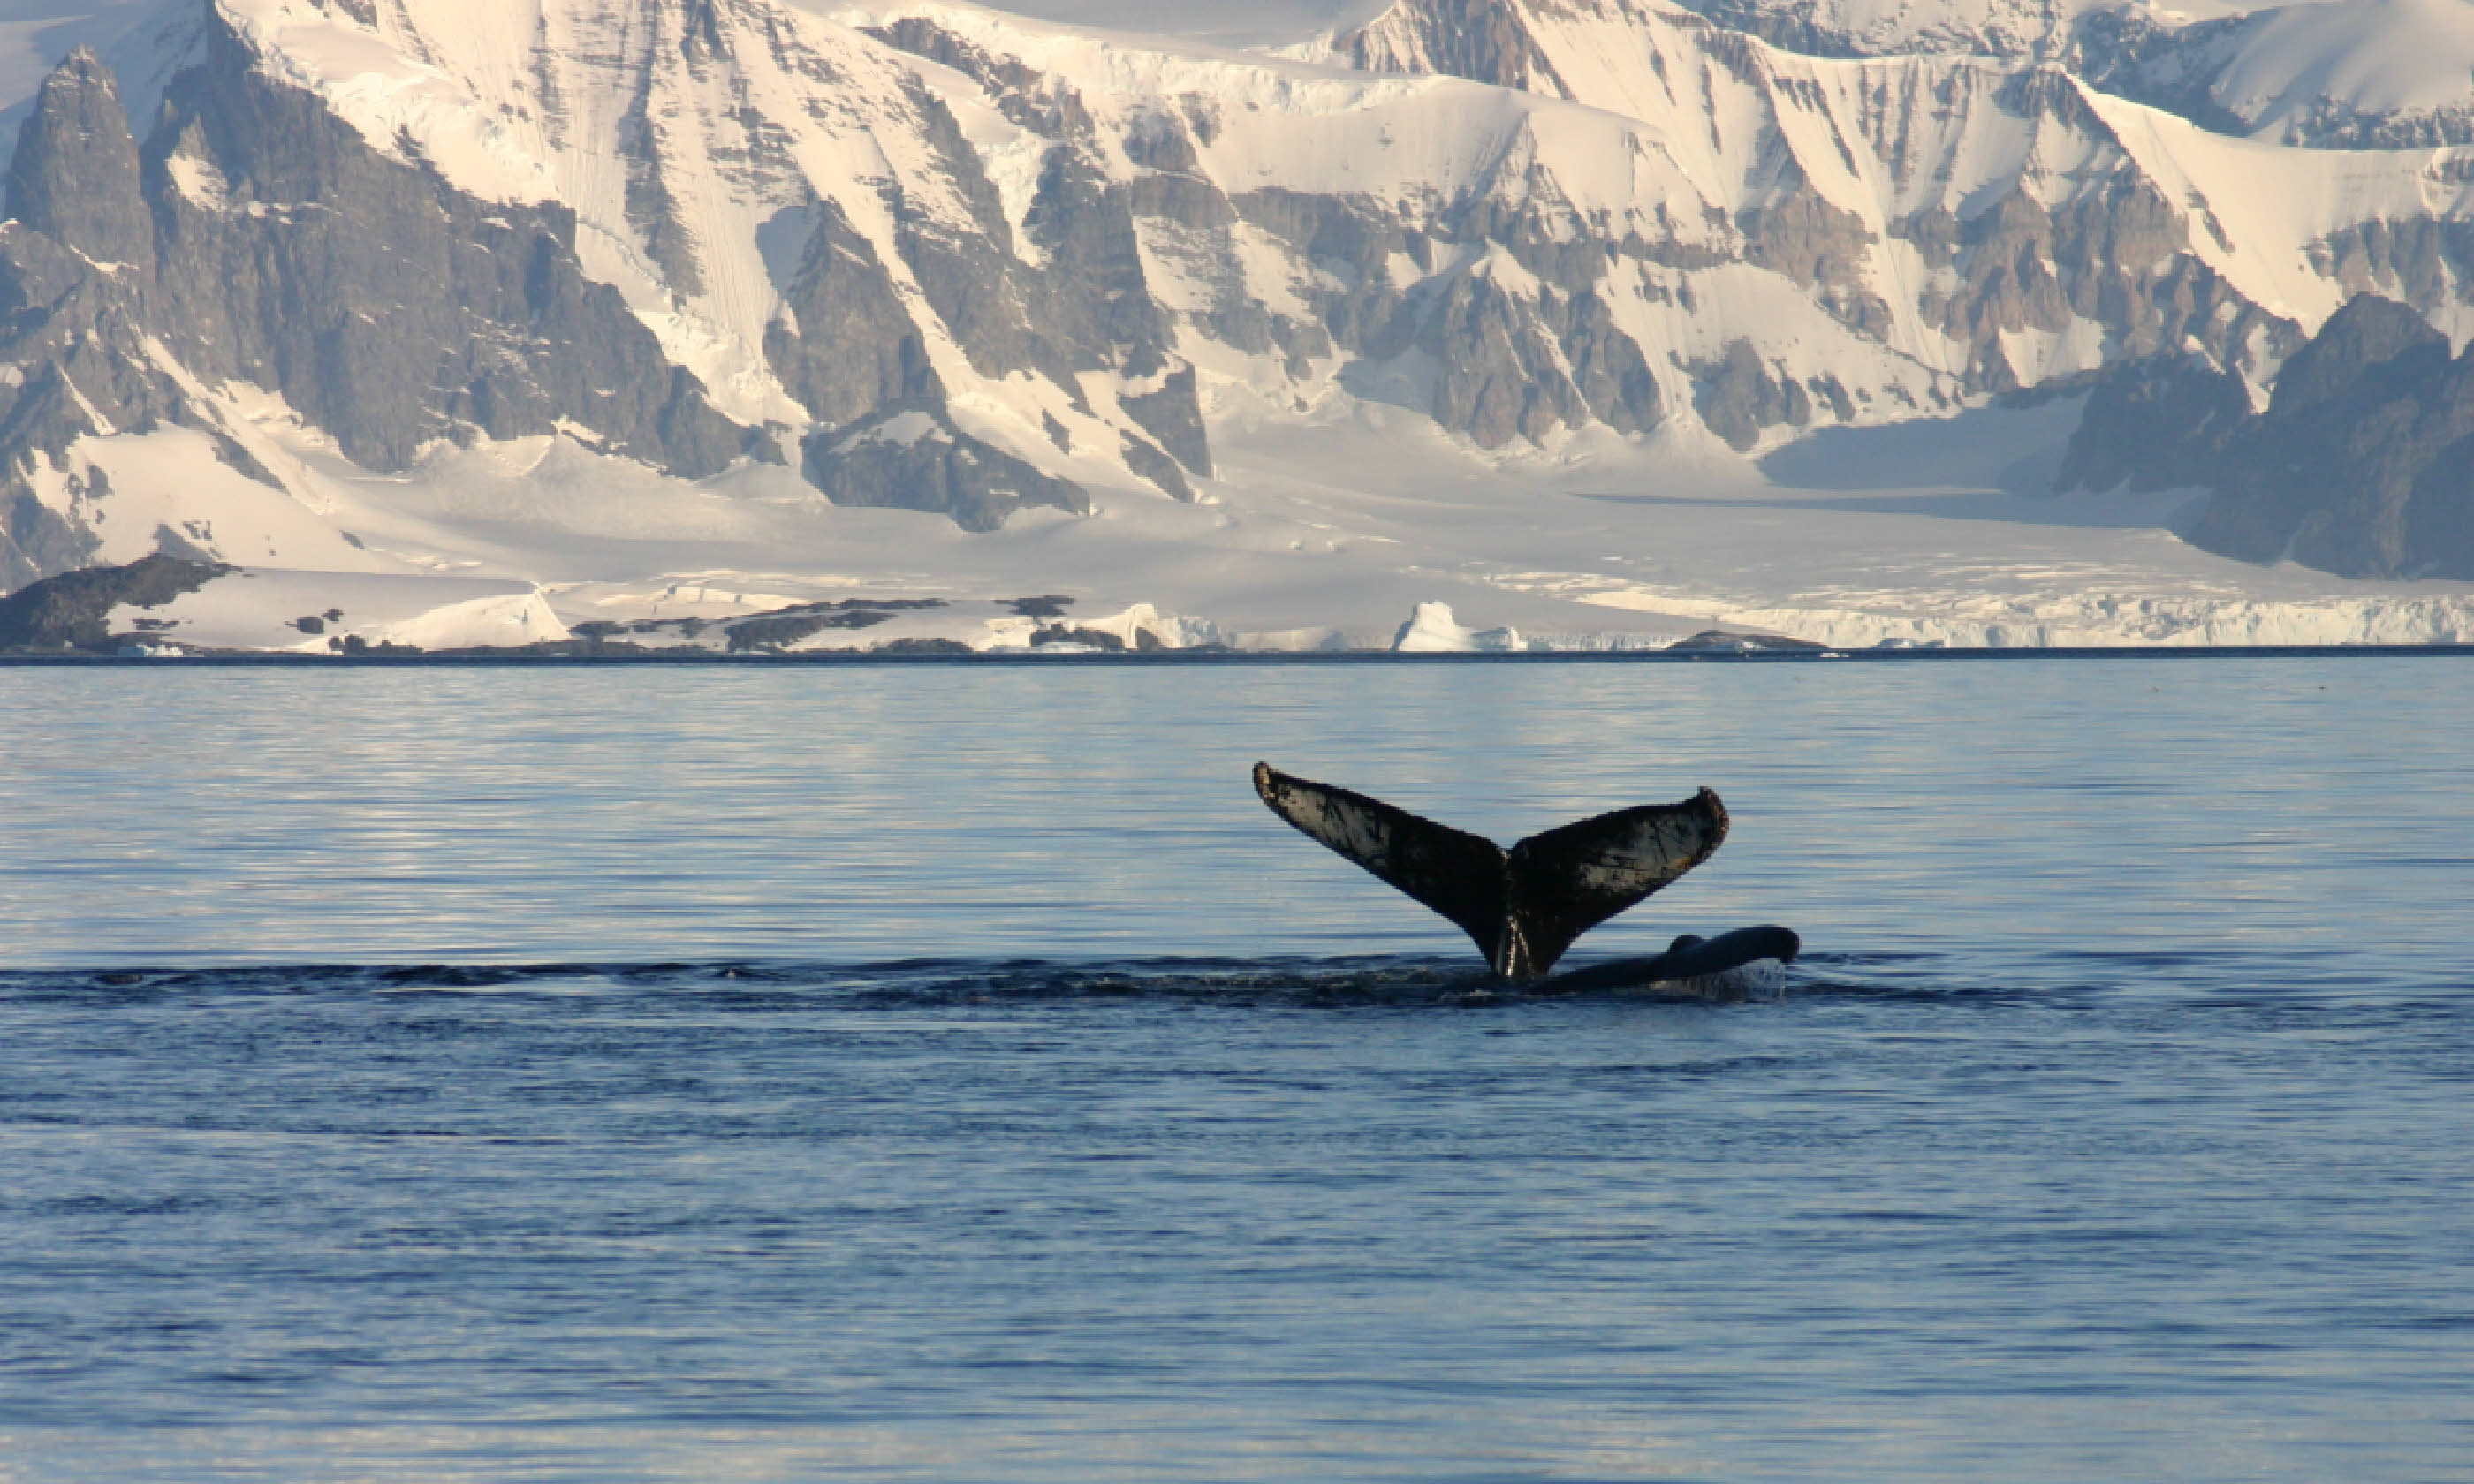 Whale fin and snowcapped landscape in Antarctica (Shutterstock)